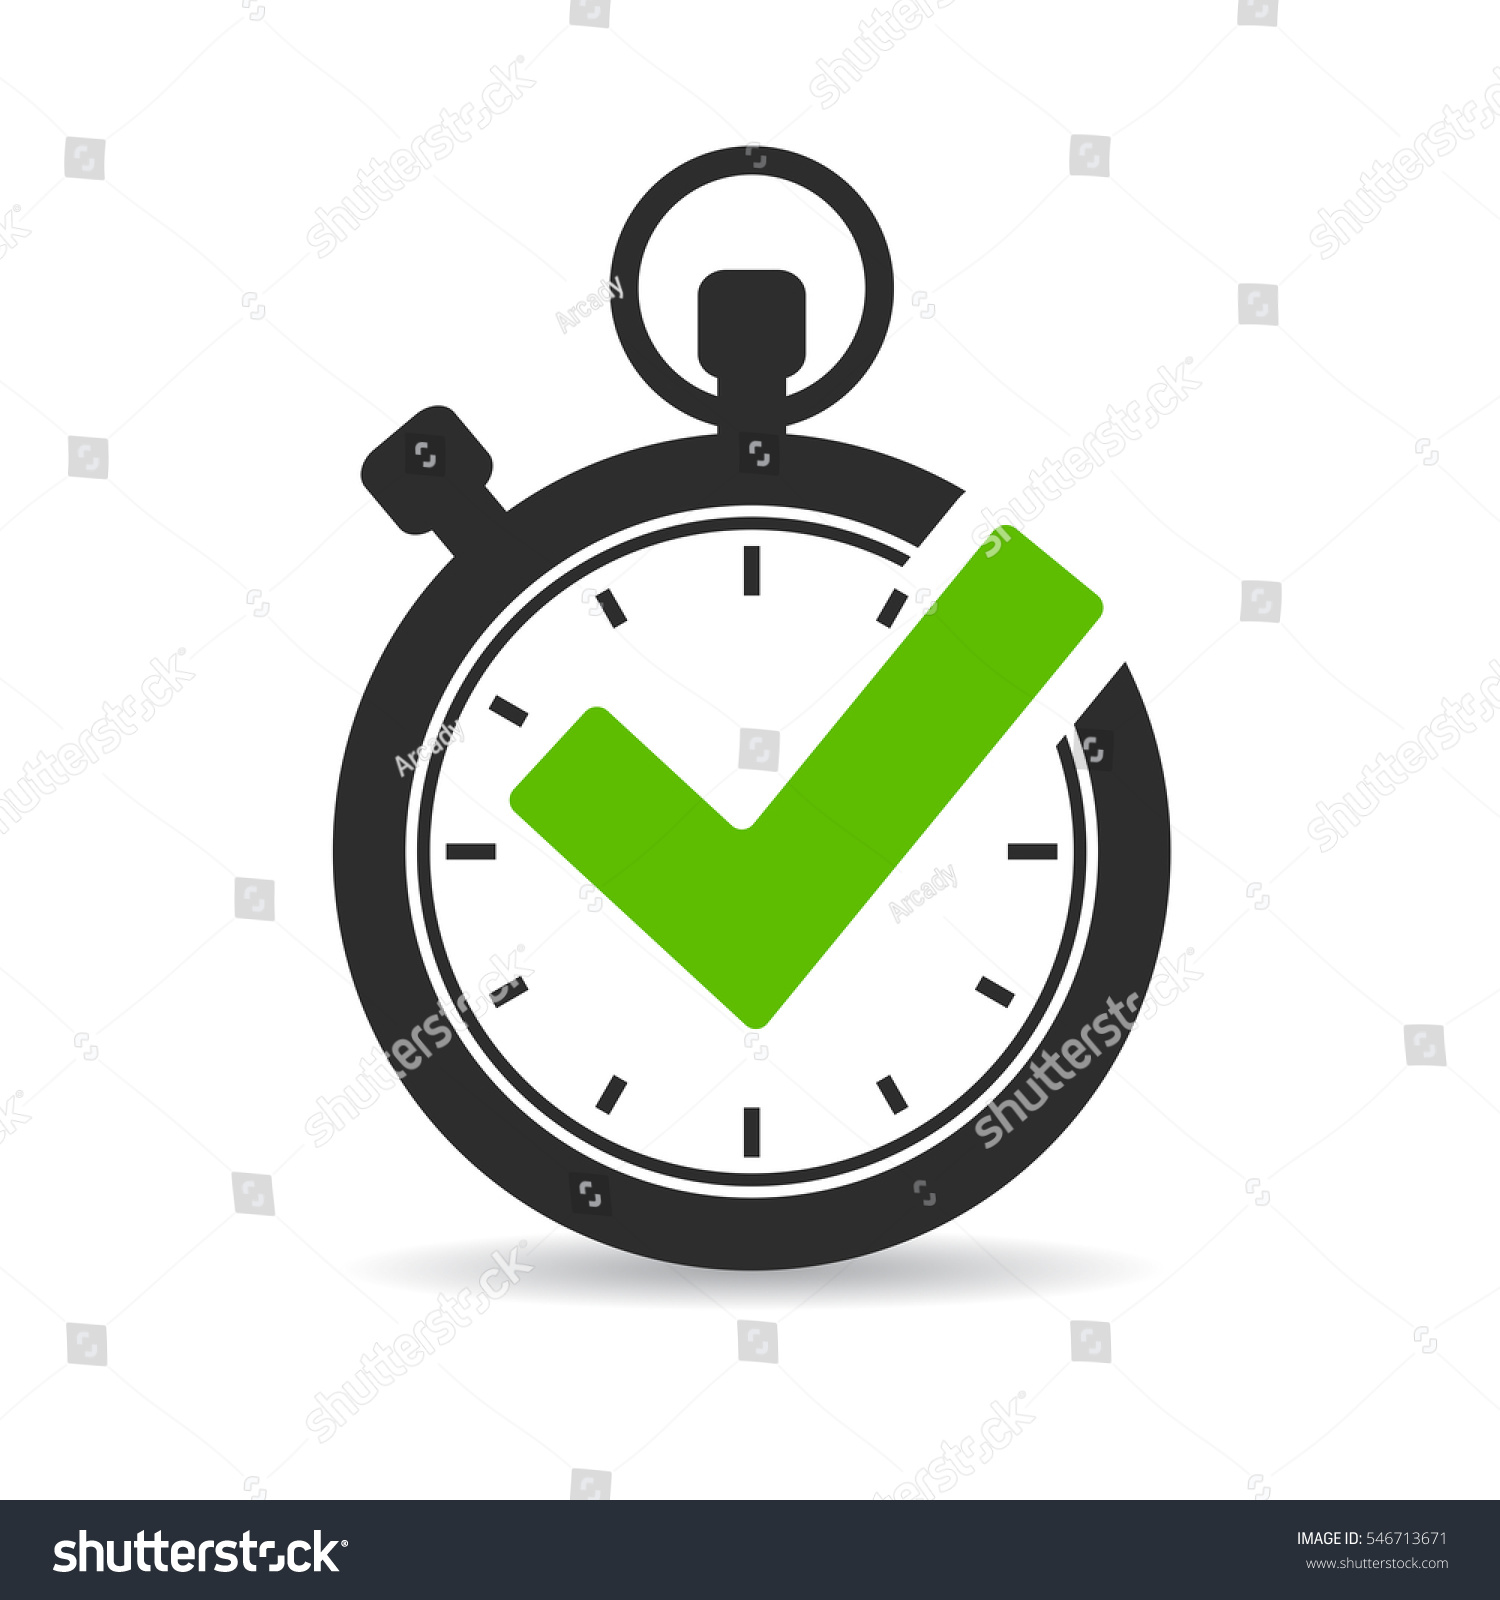 Stopwatch vector icon isolated on white background. Time timer vector icon. #546713671